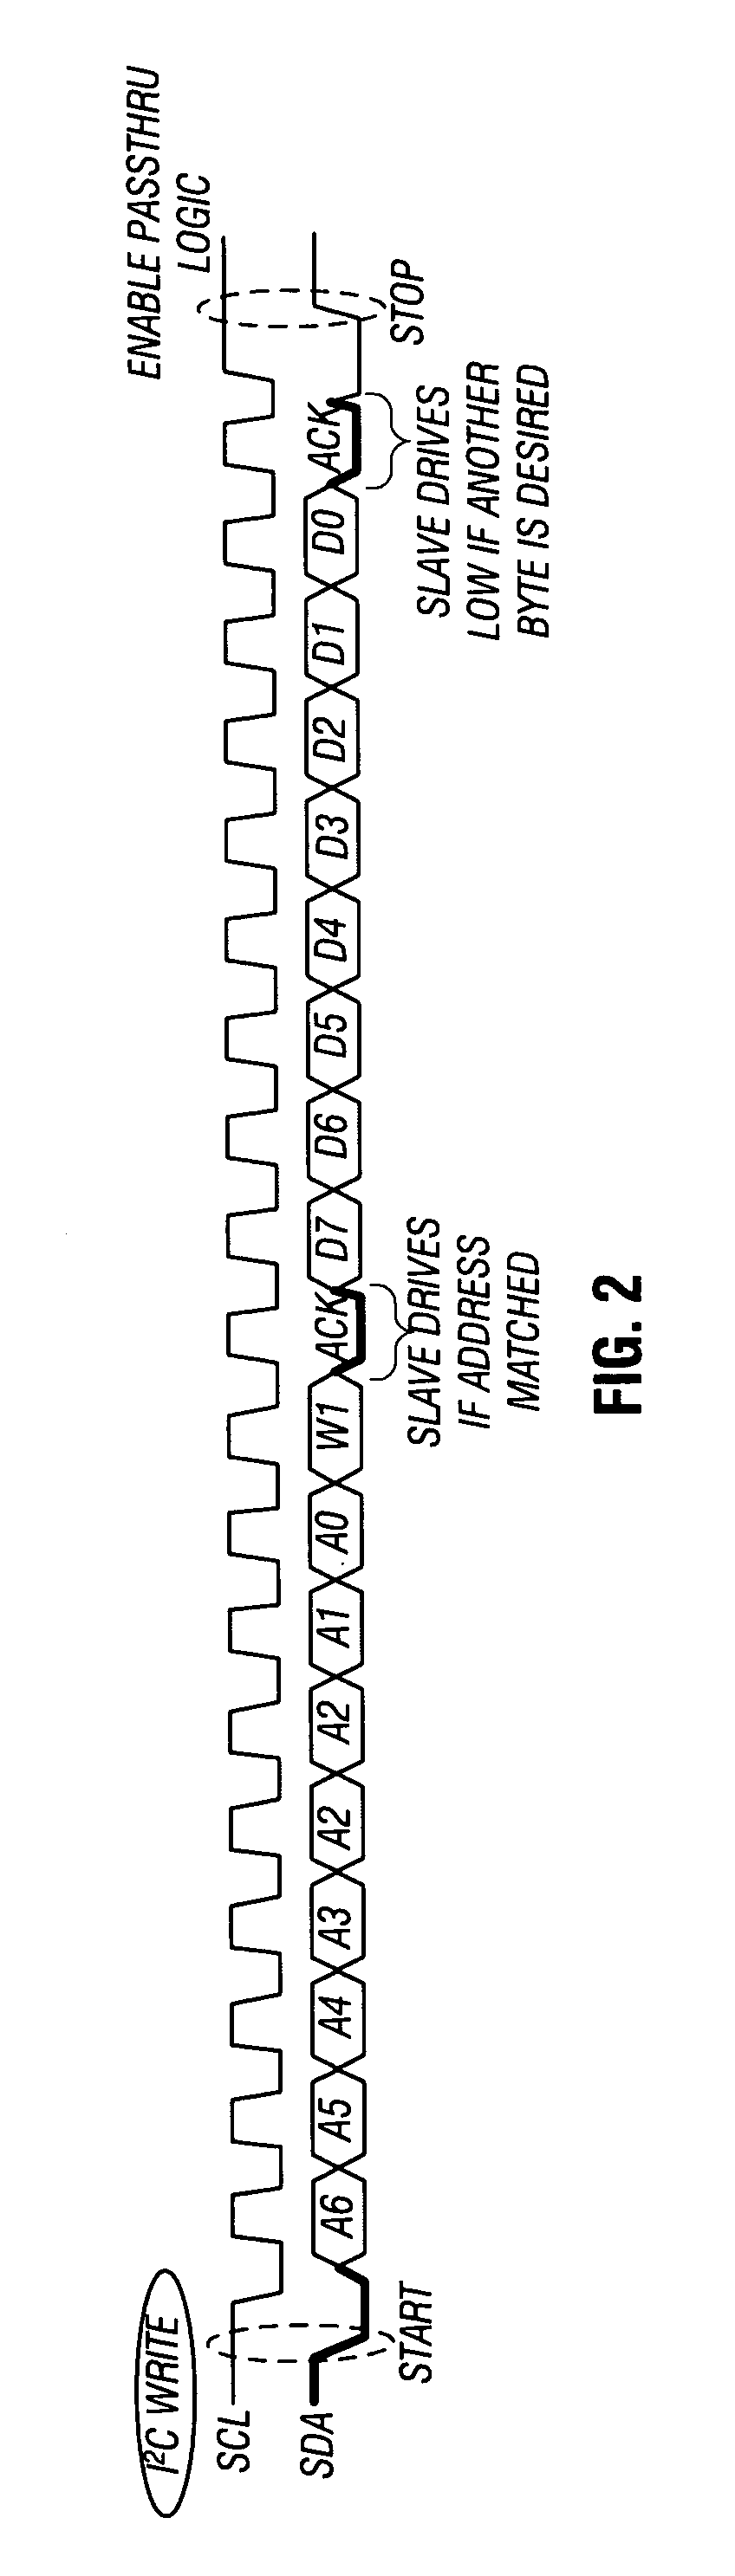 Controlling passthrough of communications between multiple buses